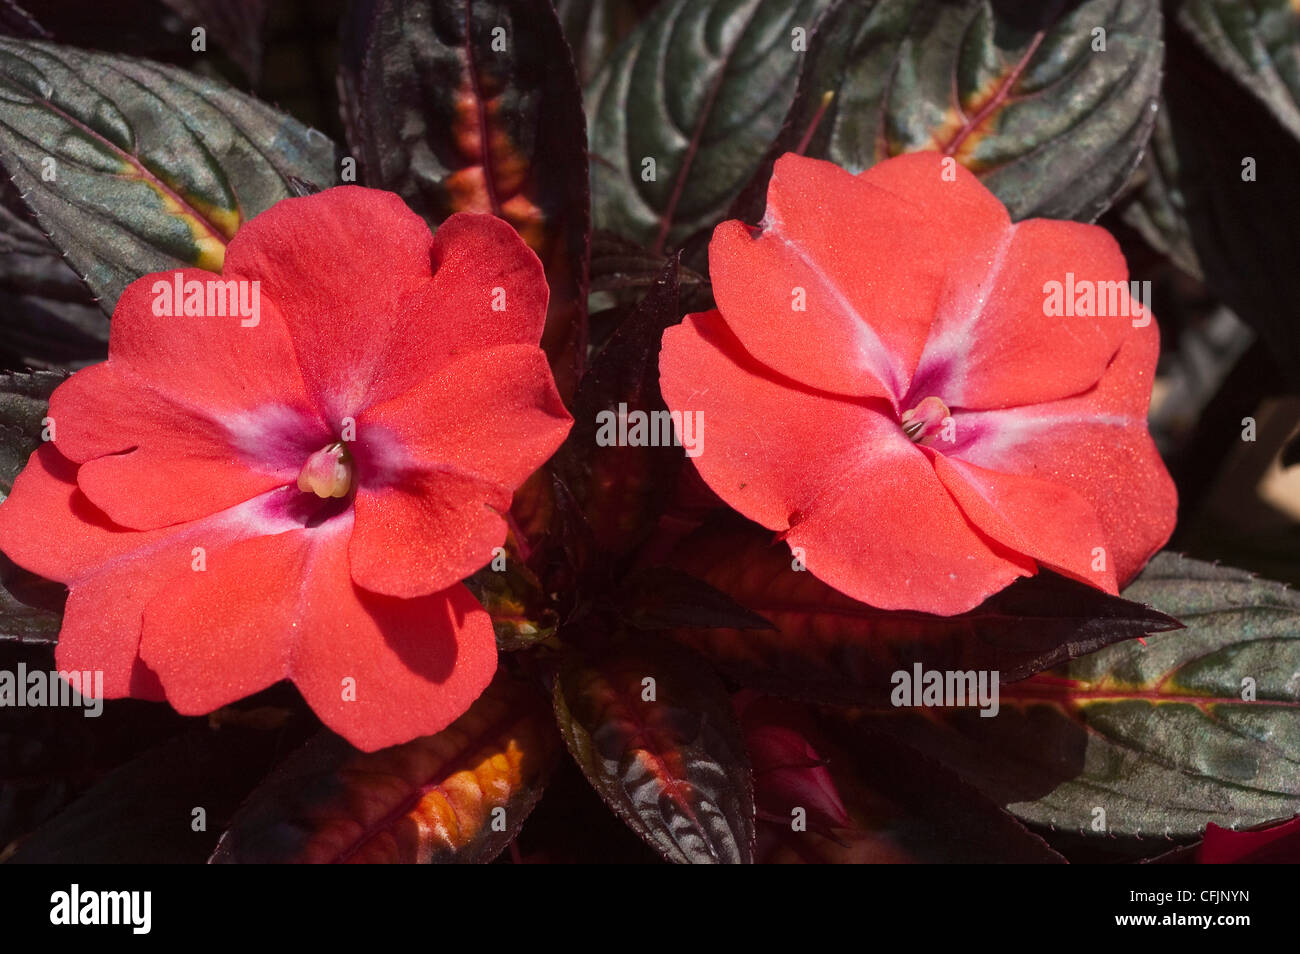 Red two flowers of Impatiens cultivar Stock Photo